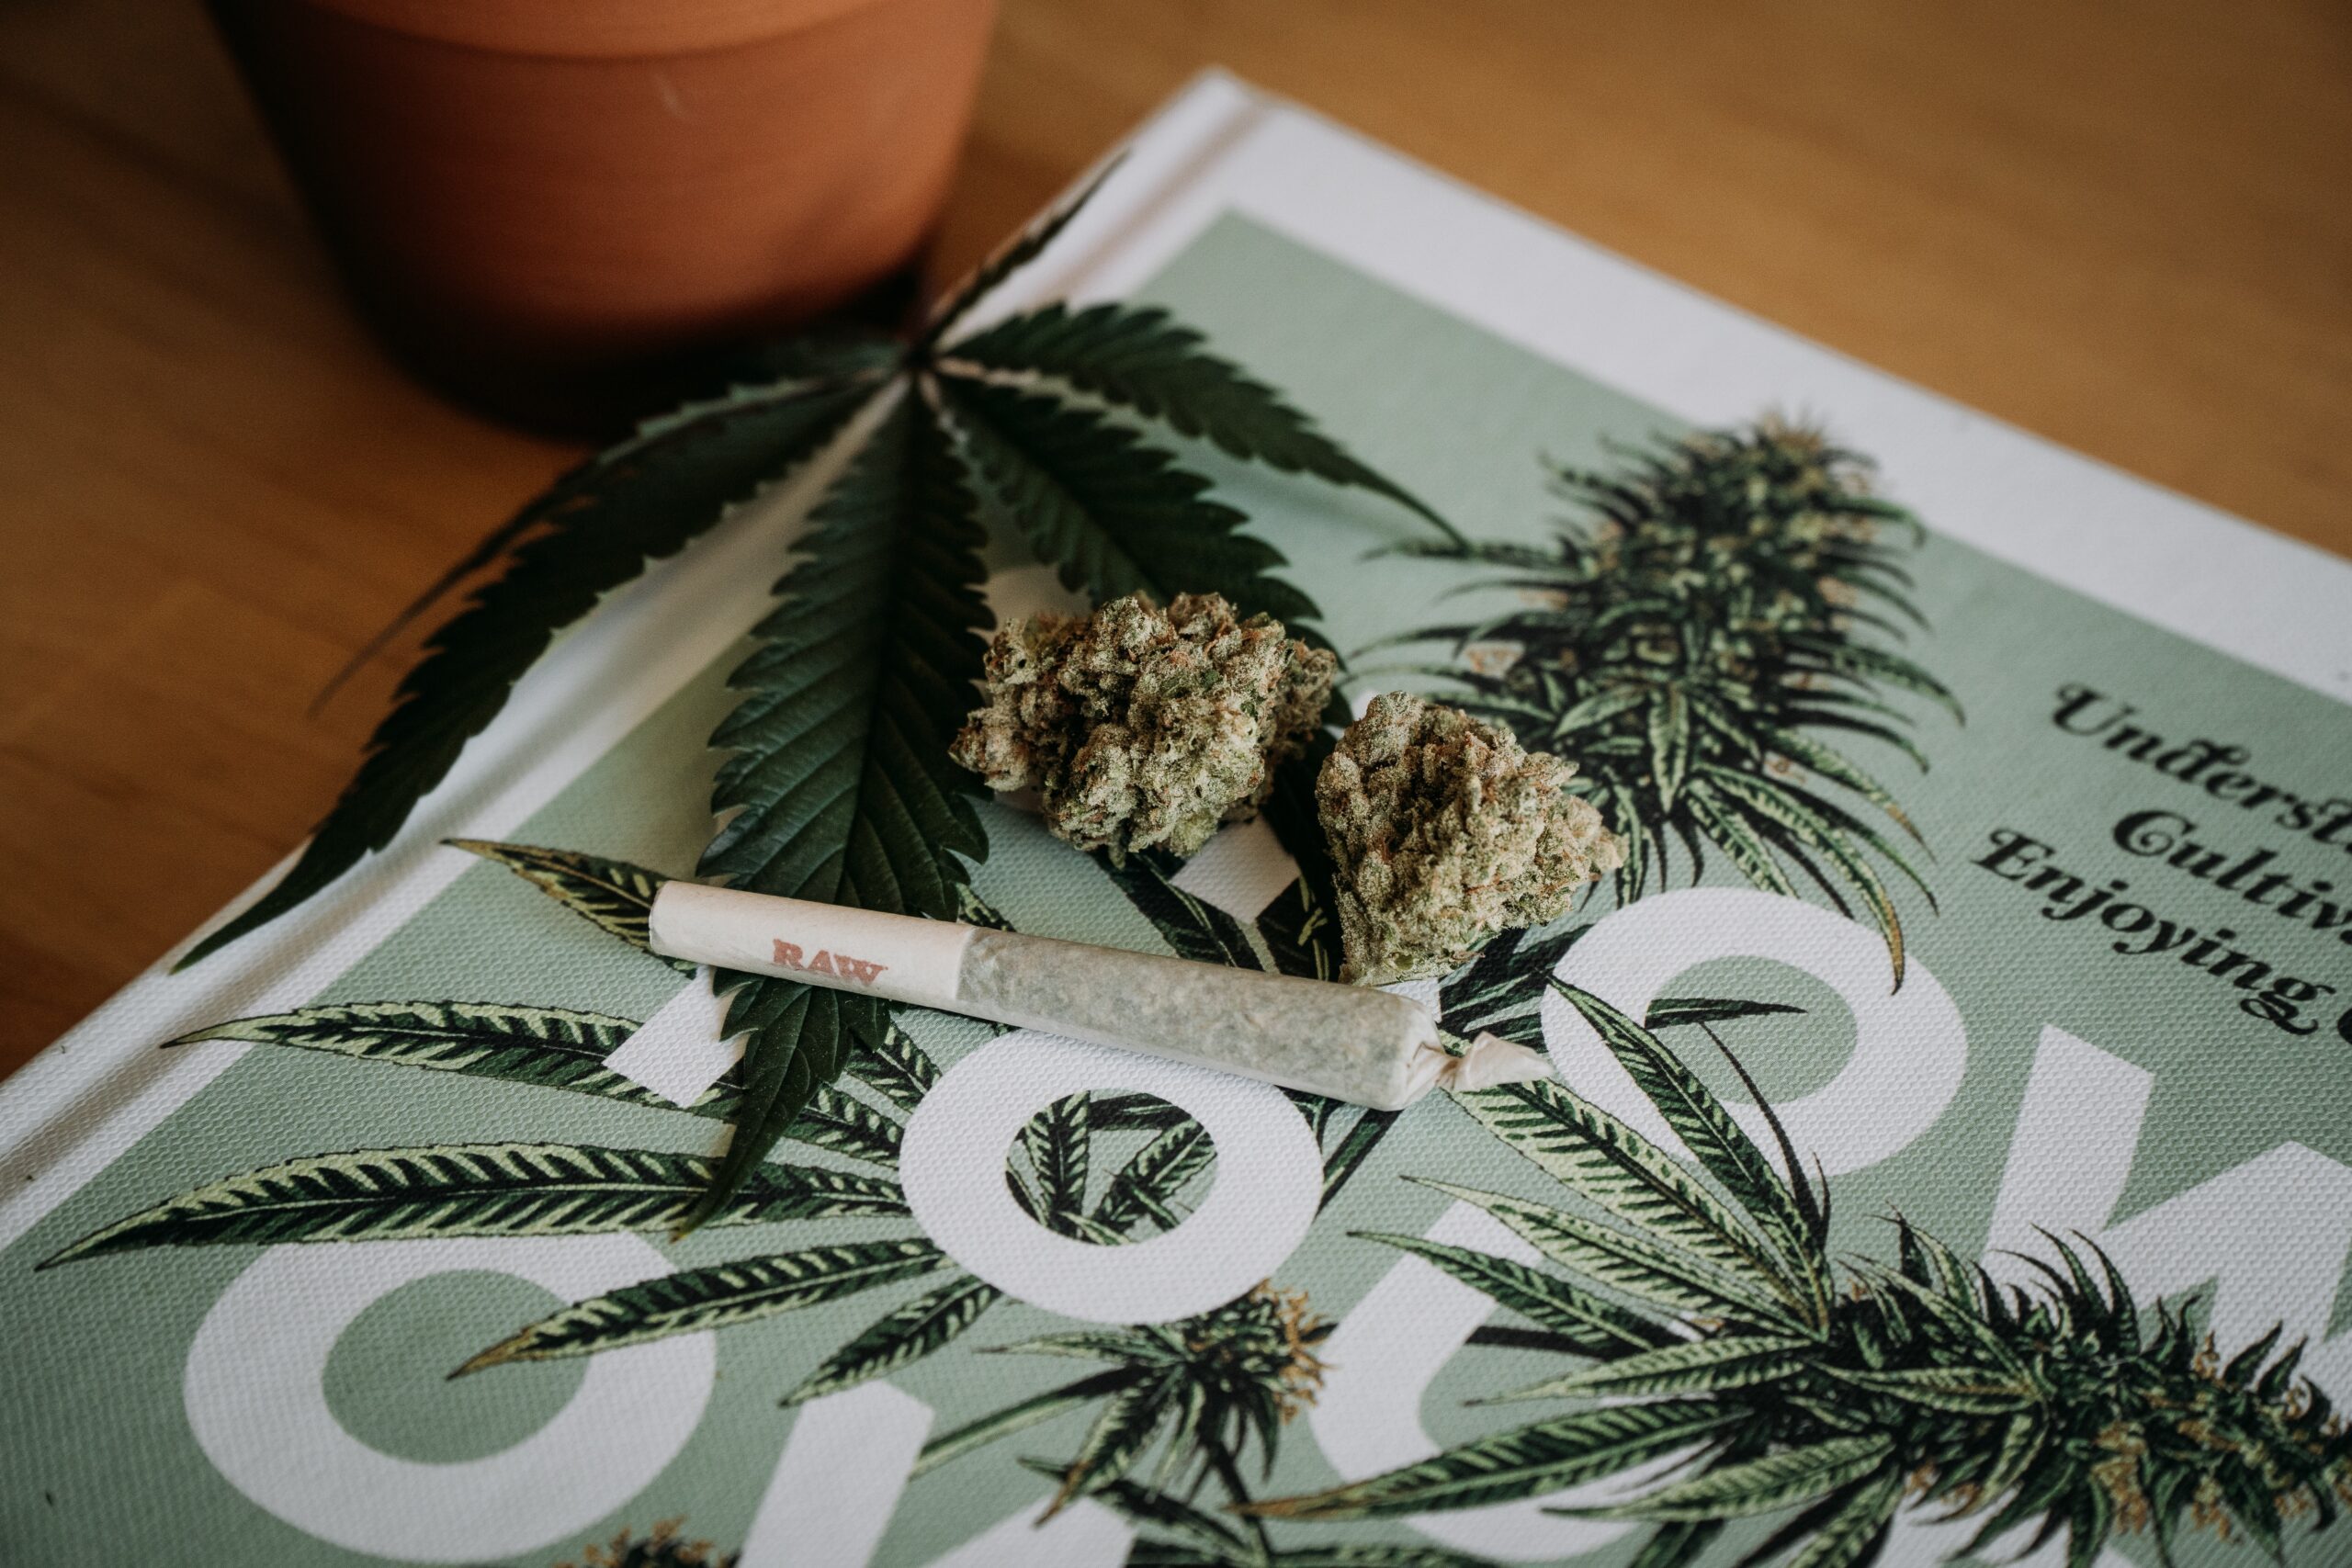 Cannabis Flower & Joint. Photo by Shelby Ireland on Unsplash